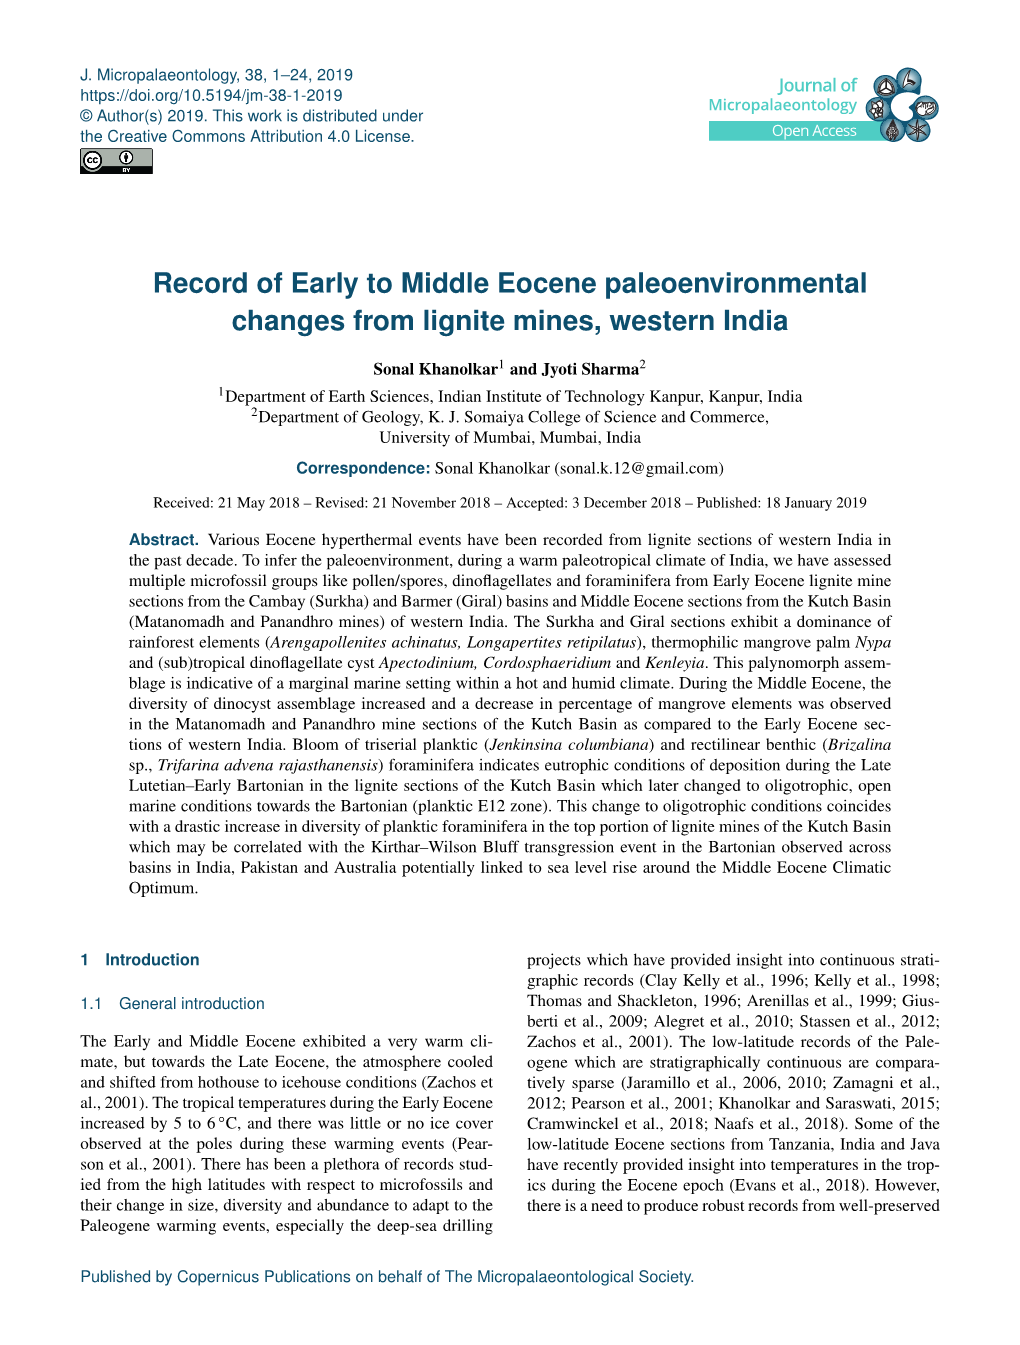 Record of Early to Middle Eocene Paleoenvironmental Changes from Lignite Mines, Western India